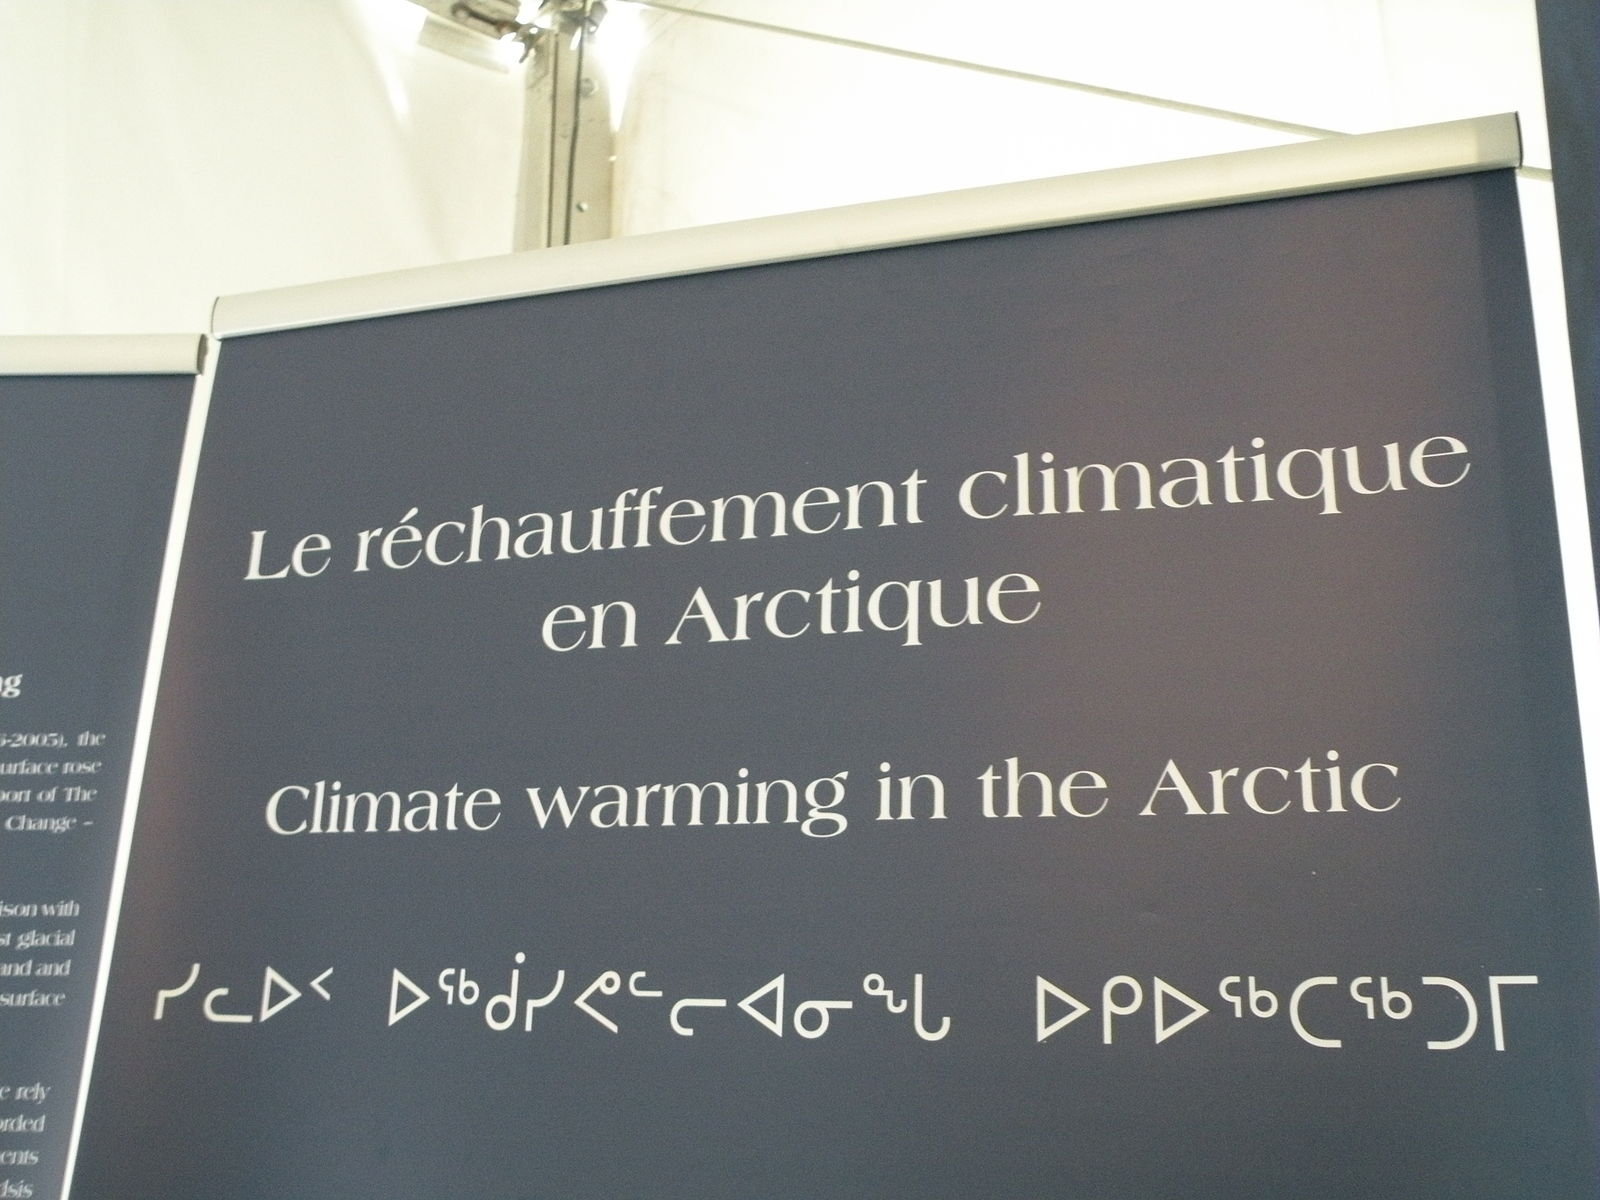 Sign for a conference with title of a session (Climate warming in the Arctic) in French, English, and Inuktitut